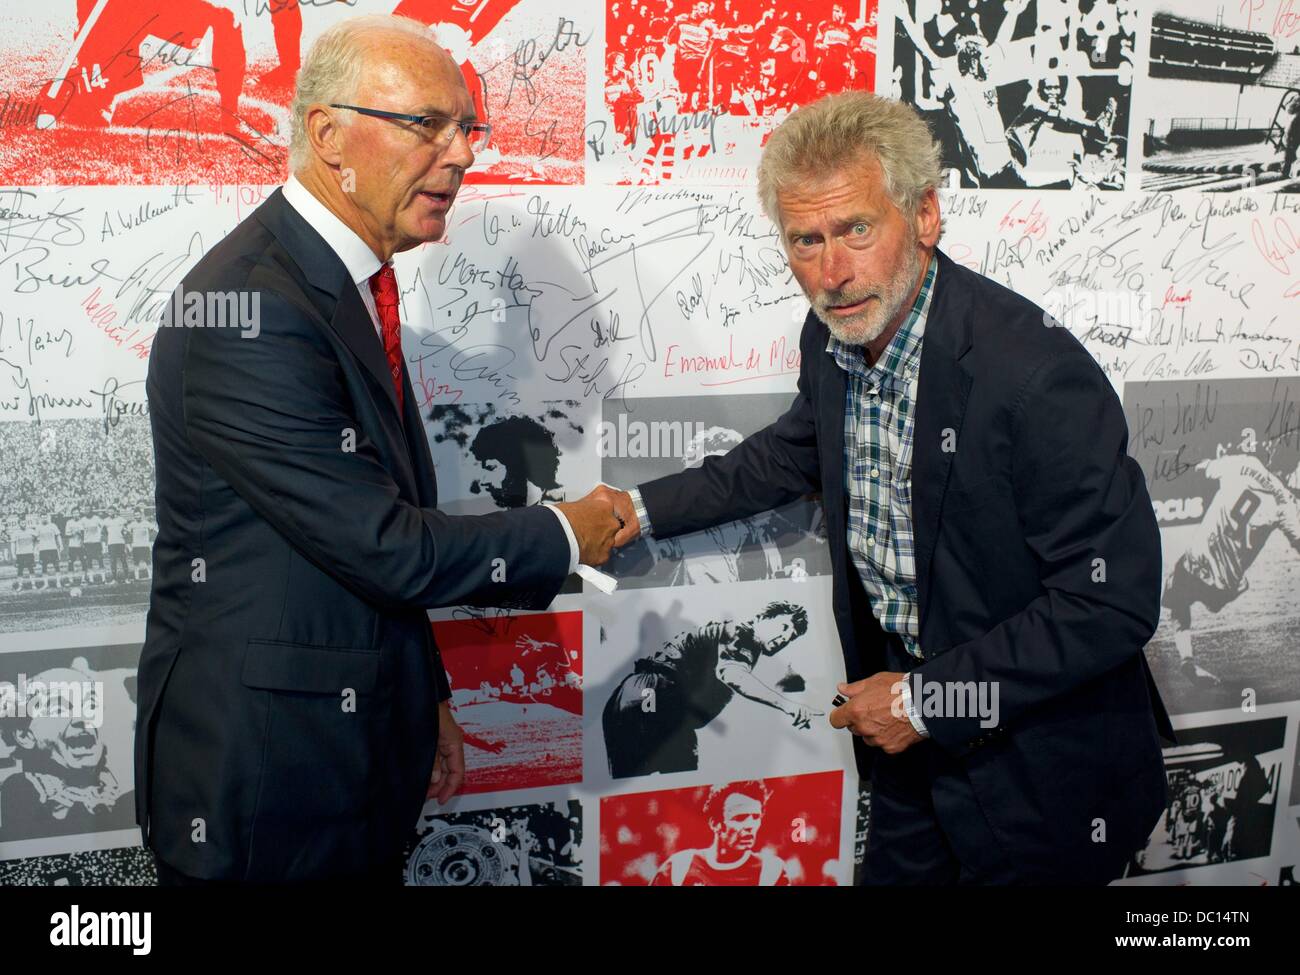 Berlin, Germany. 06th Aug, 2013. Franz Beckenbauer (L) and Paul Breitner sign on a signing board prior to an event to celebrate the 50th anniversary of the German Bundesliga in Berlin, Germany, 06 August 2013. Photo: Tim Brakemeier/dpa/Alamy Live News Stock Photo